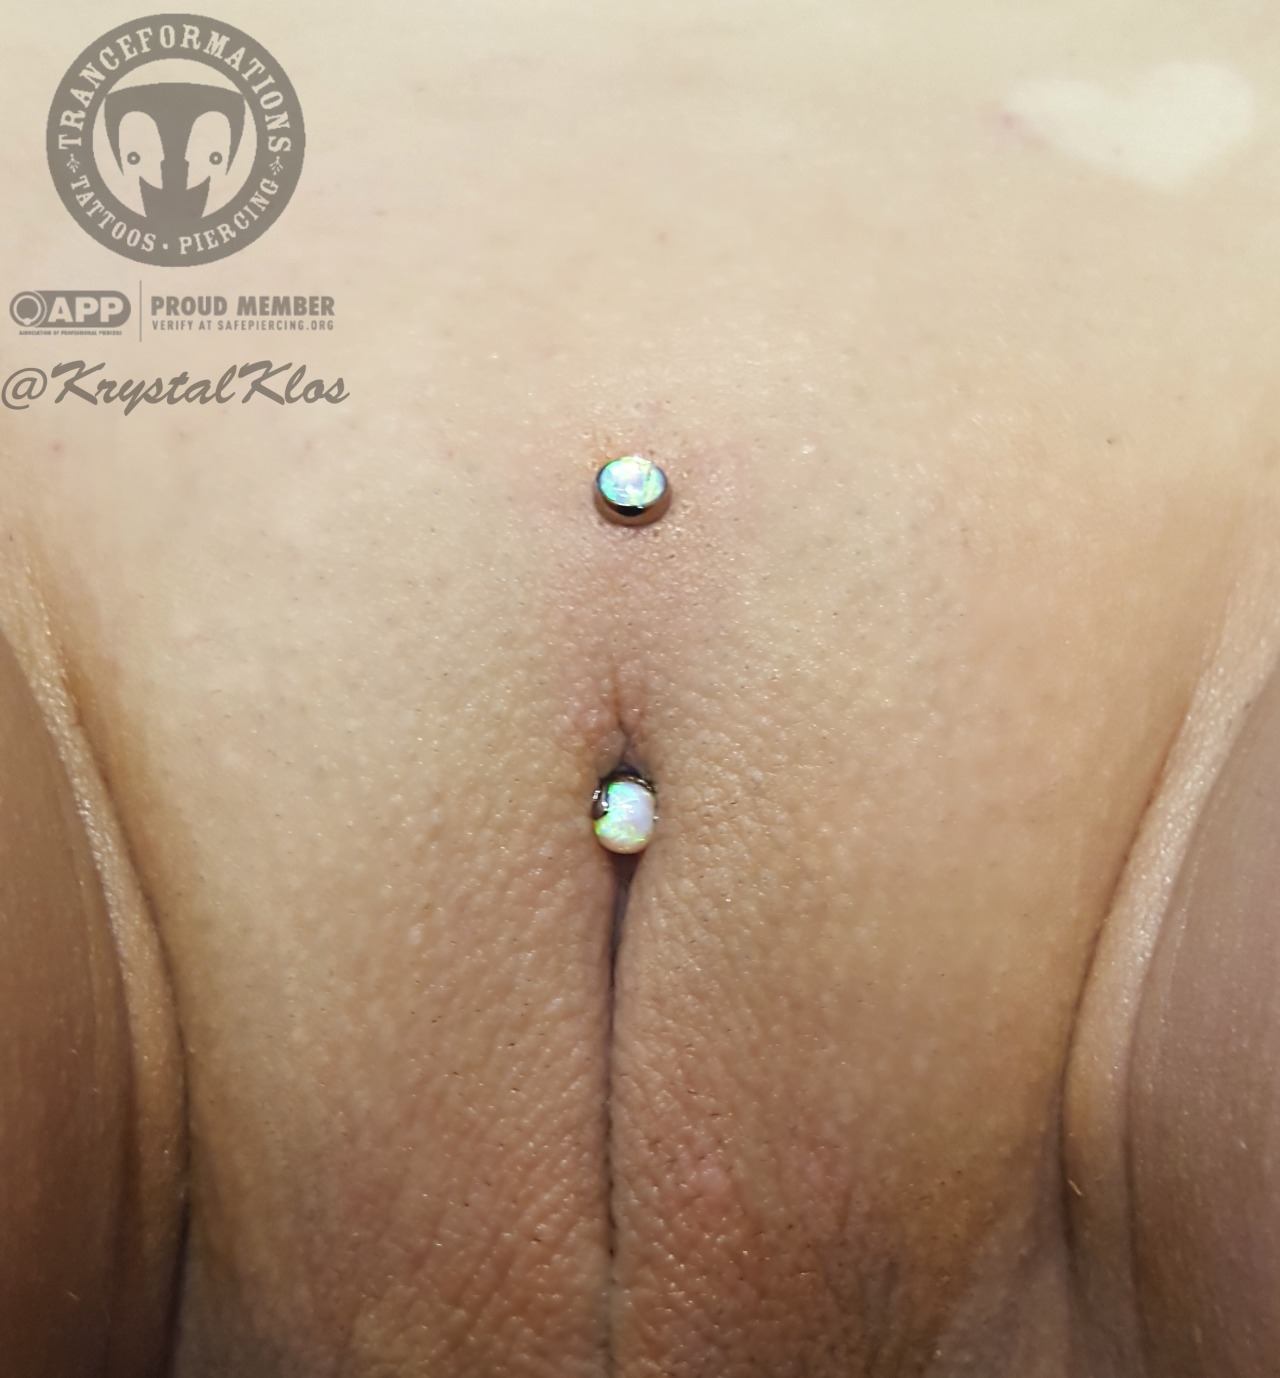 Body Piercing And Genital Tattoo Pictures 59